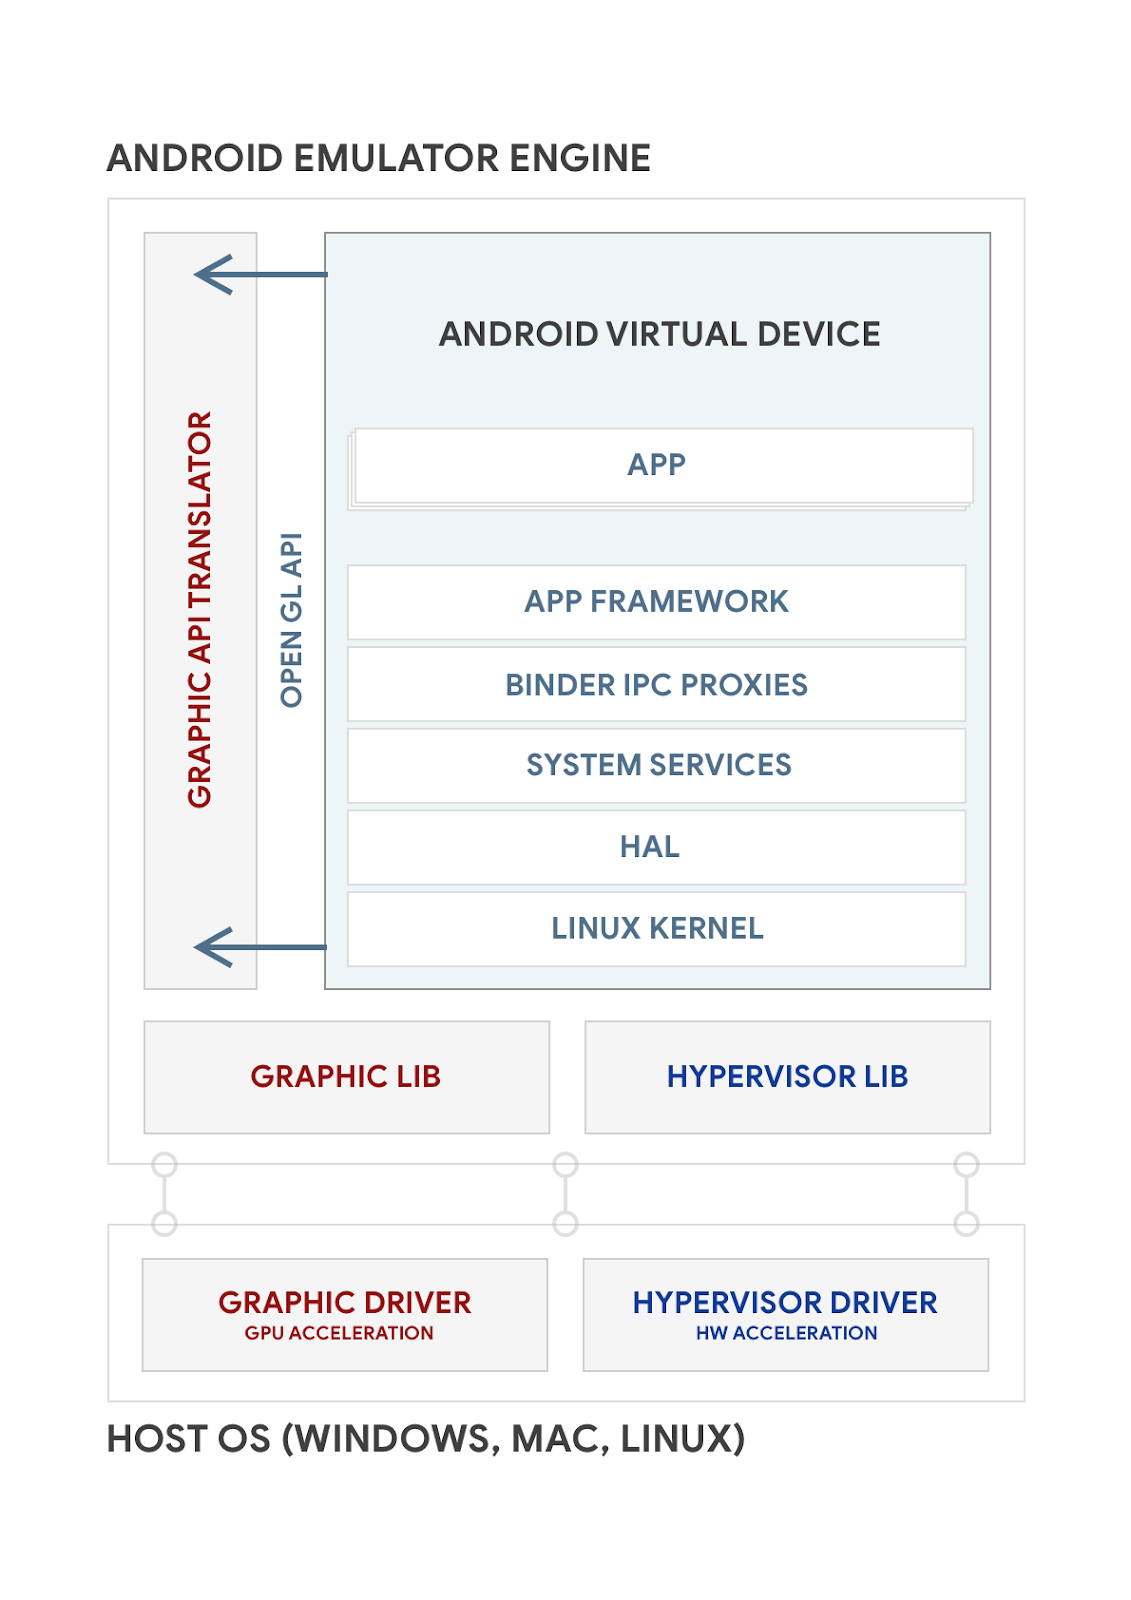 **Android Emulator System Architecture**